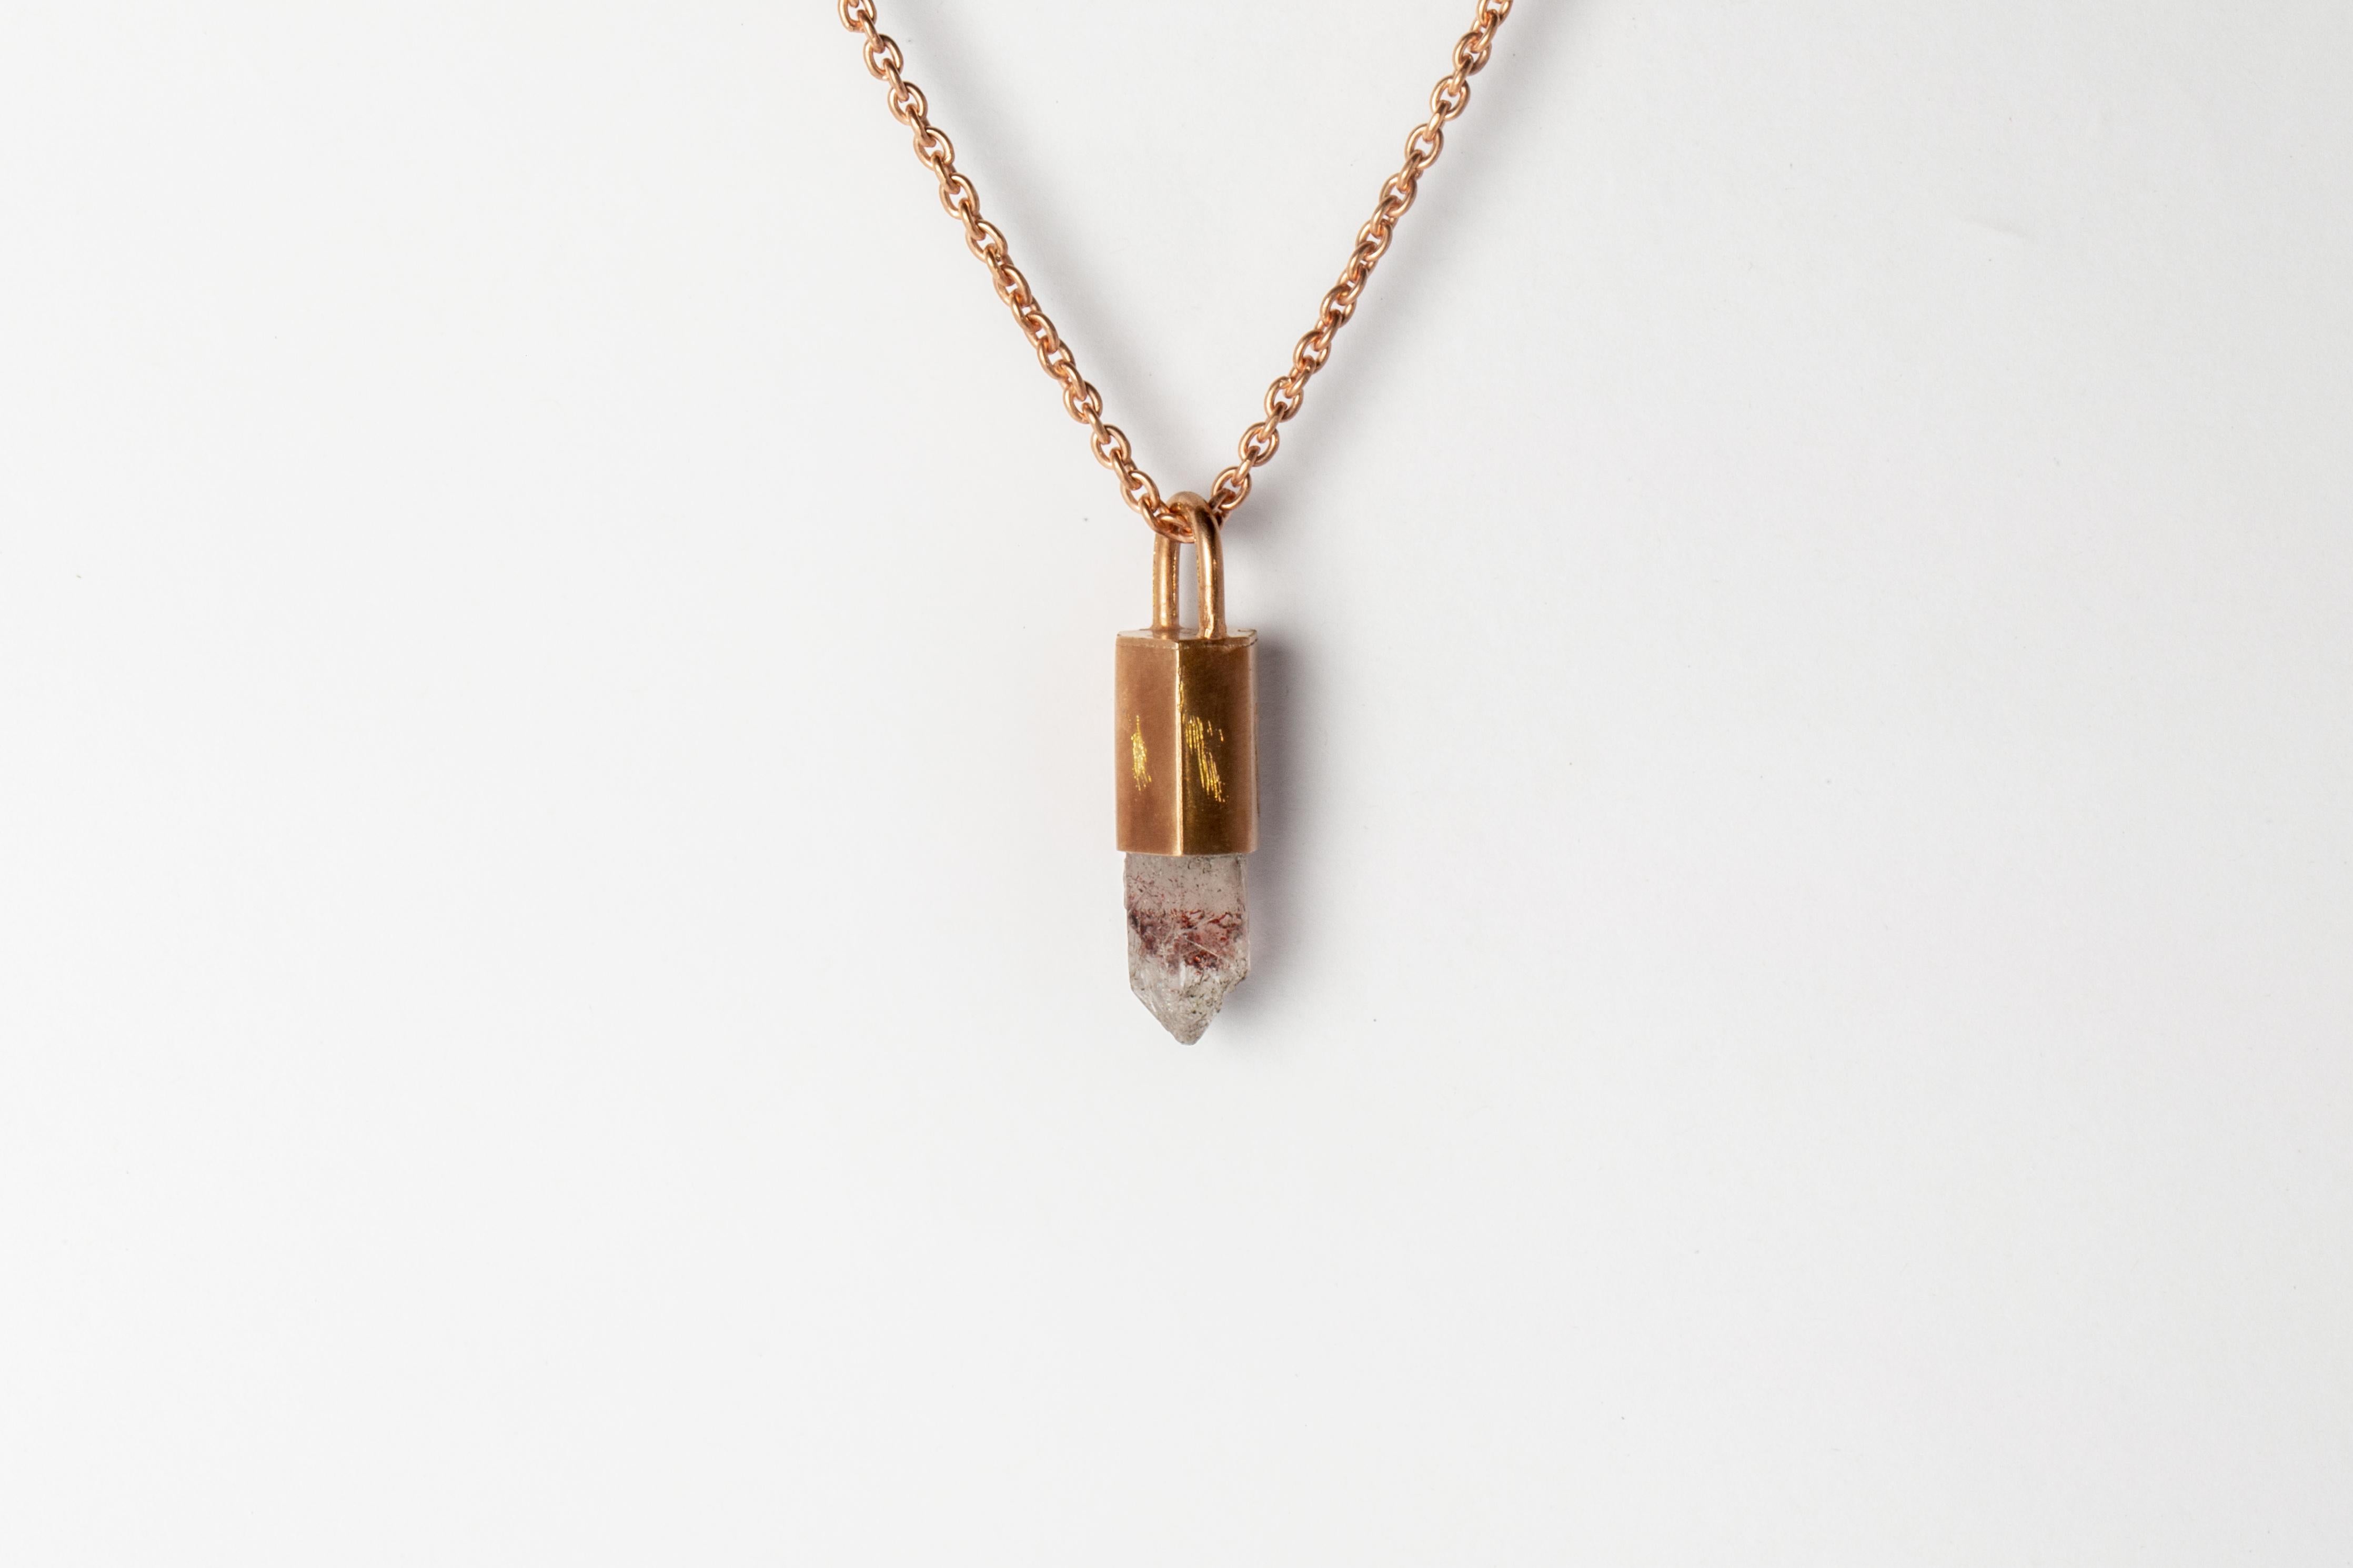 Pendant necklace in brass, sterling silver, and a rough of hematite quartz. Brass and sterling silver substrates are electroplated with 18k rose gold and then dipped into acid to create the subtly destroyed surface.
The Talisman series is an